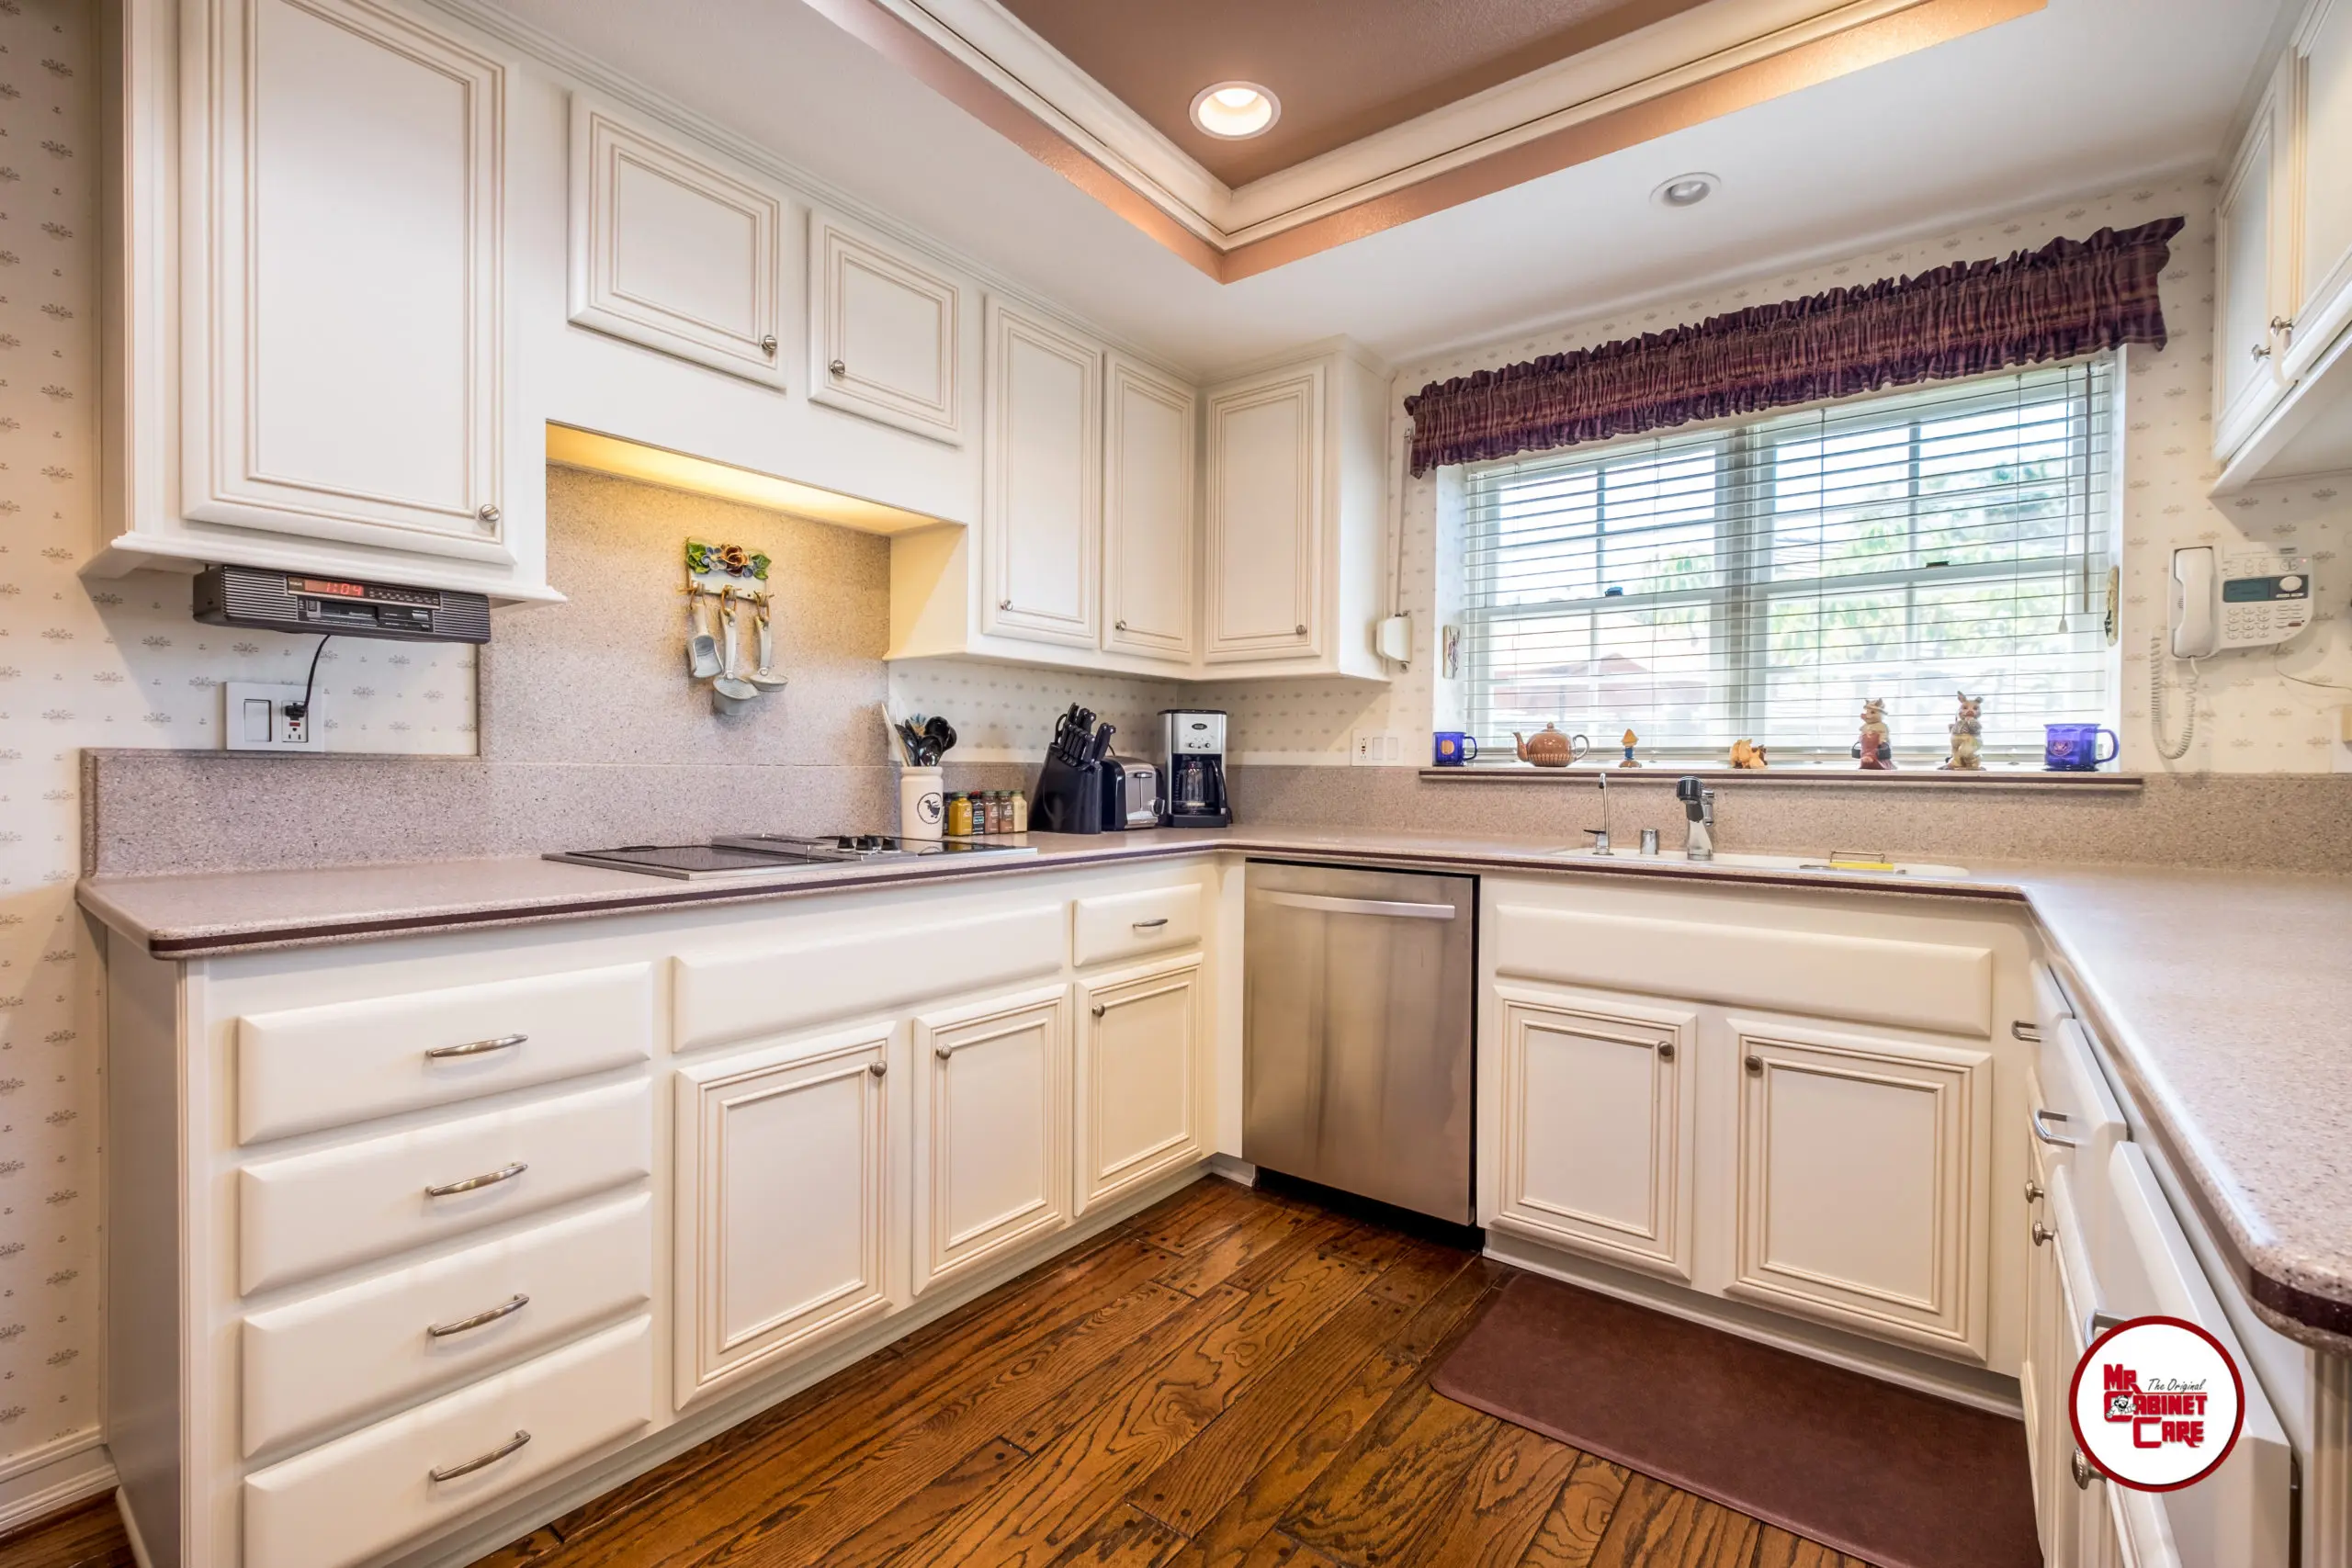 Breaking Down The Costs Of Cabinet Refacing, Average Cost To Resurface Kitchen Cabinets